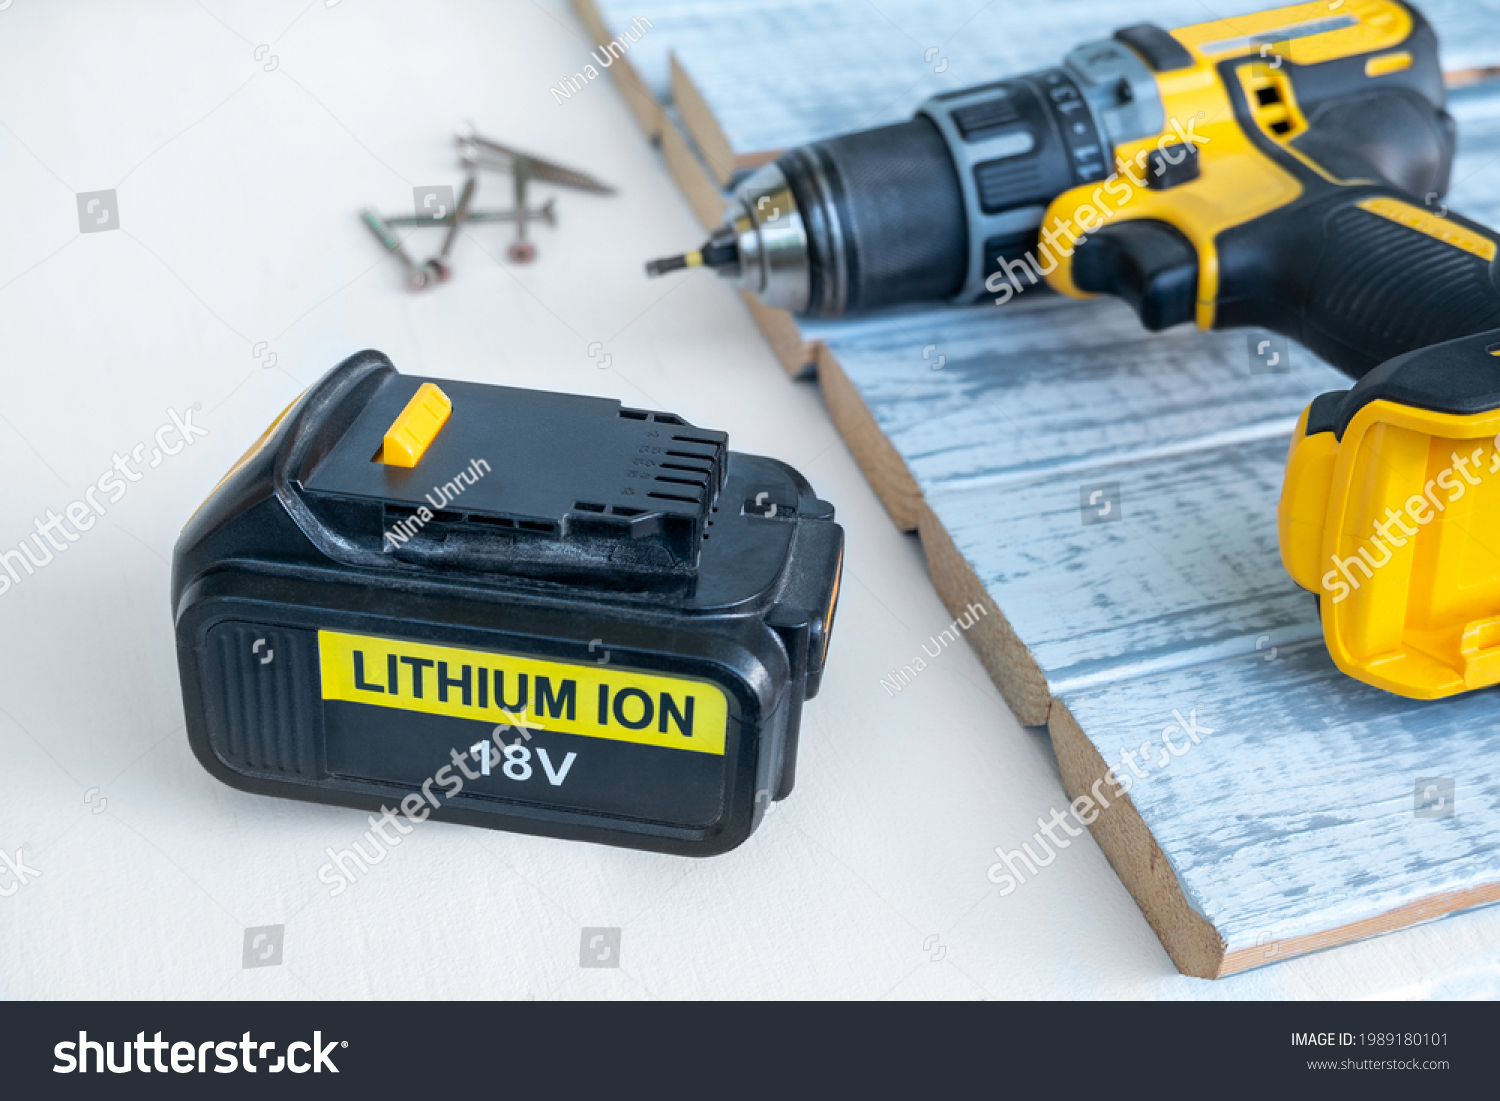 Close up 18 volt recharge Li-ion battery for electric cordless tool,saw,rotary hammer,drill,jigsaw,wrench on white.Blurred screwdriver,screws on gray-painted boards behind.Selective focus, copy space #1989180101